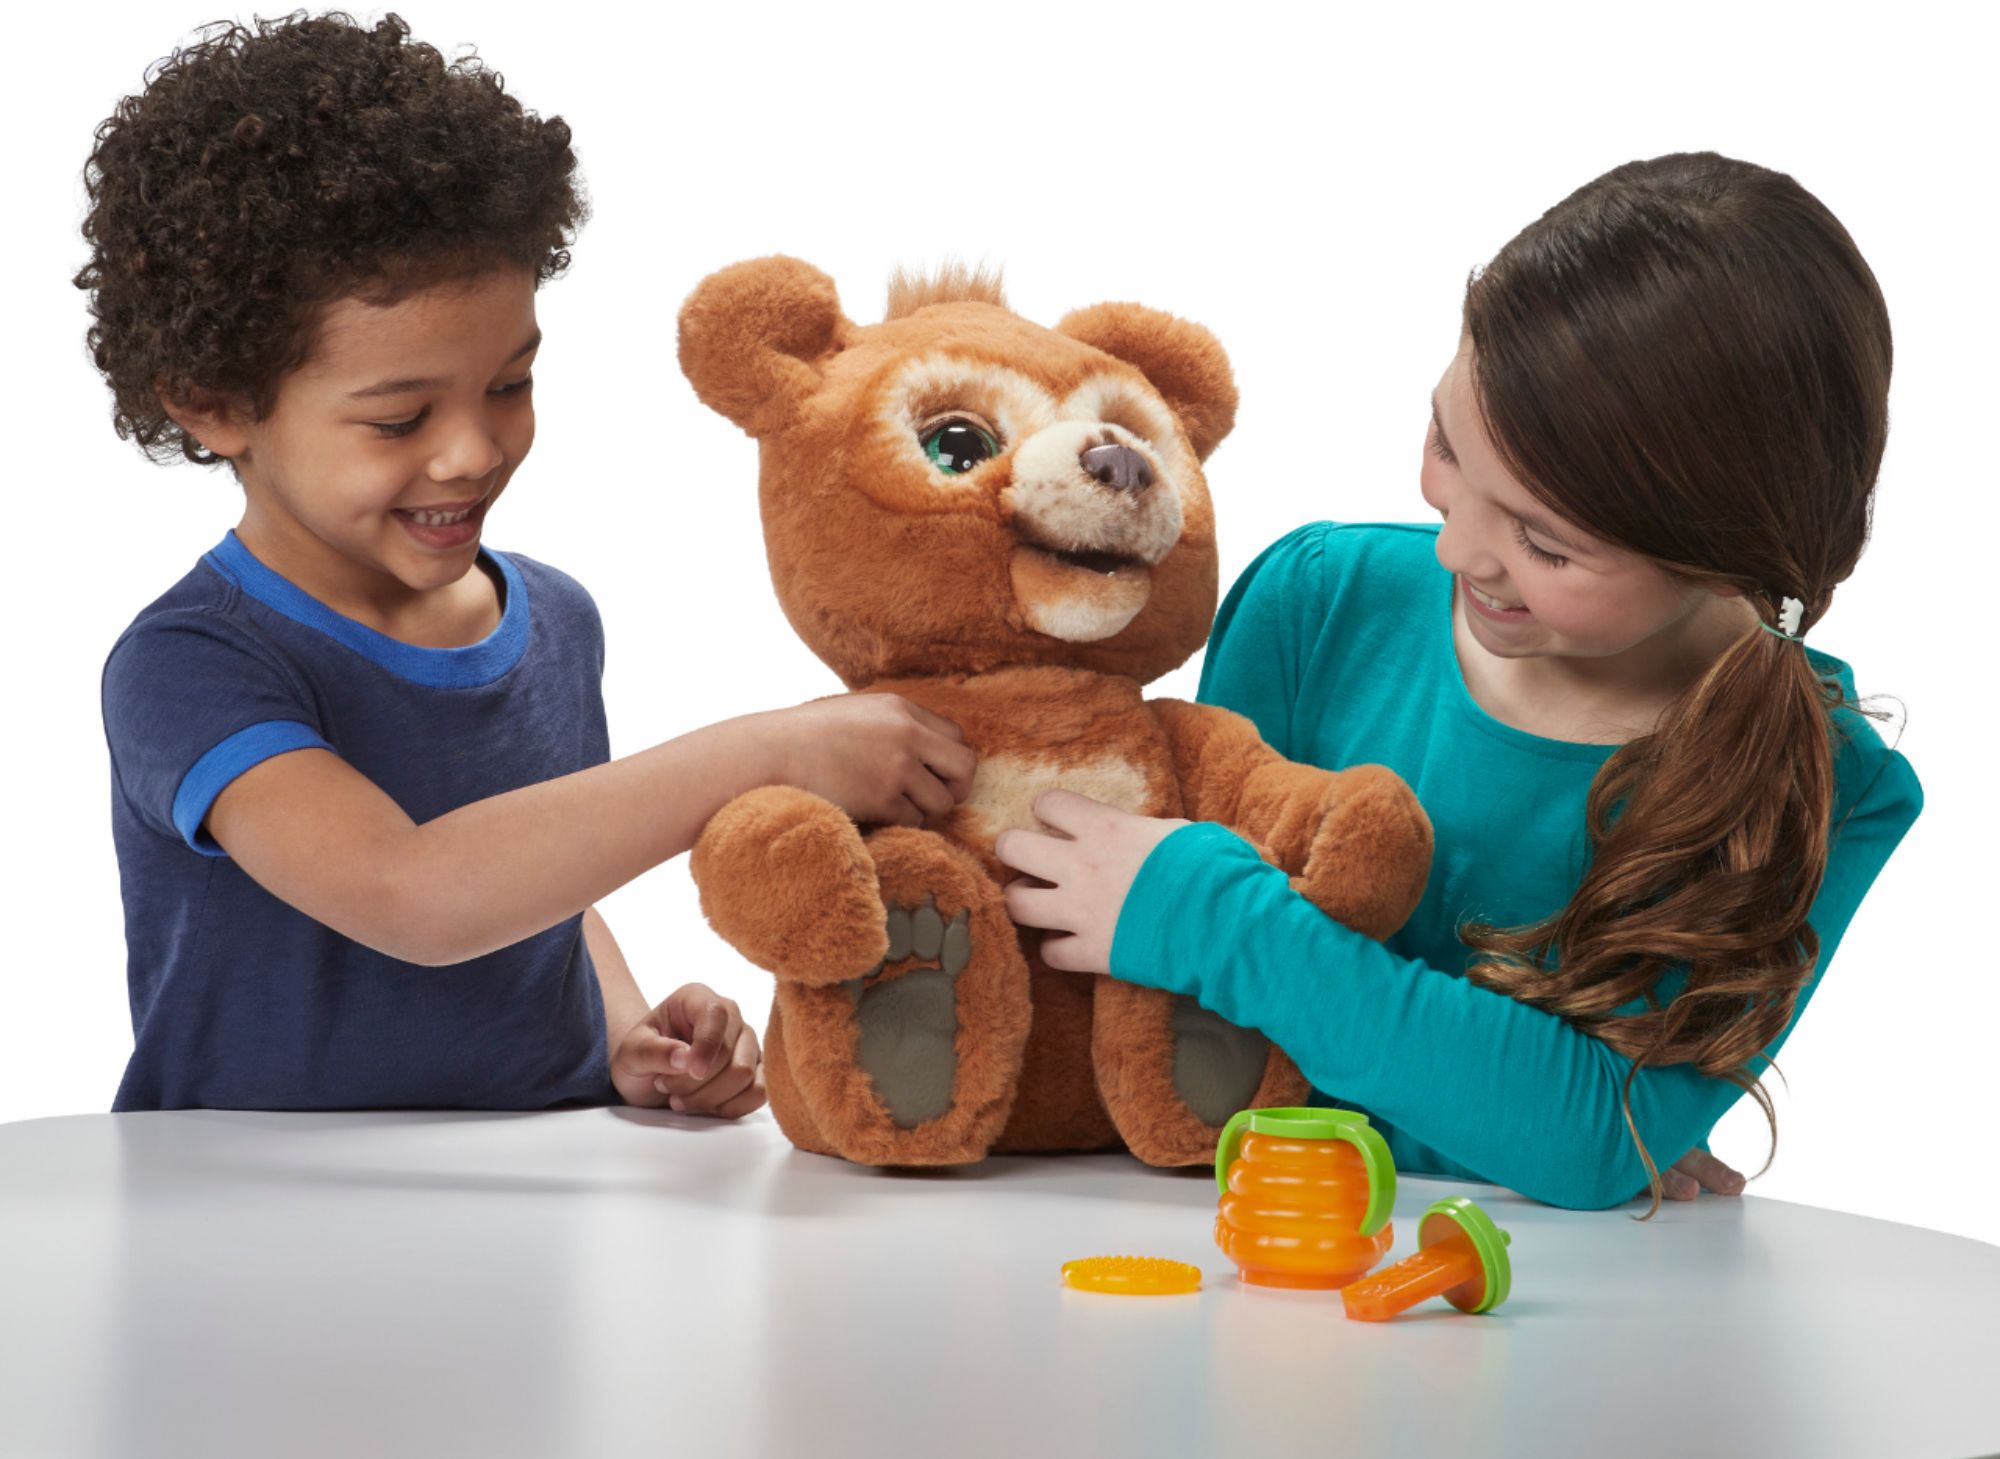 FURREAL CUBBY CURIOUS BEAR INTERACTIVE PLUSH TOY 